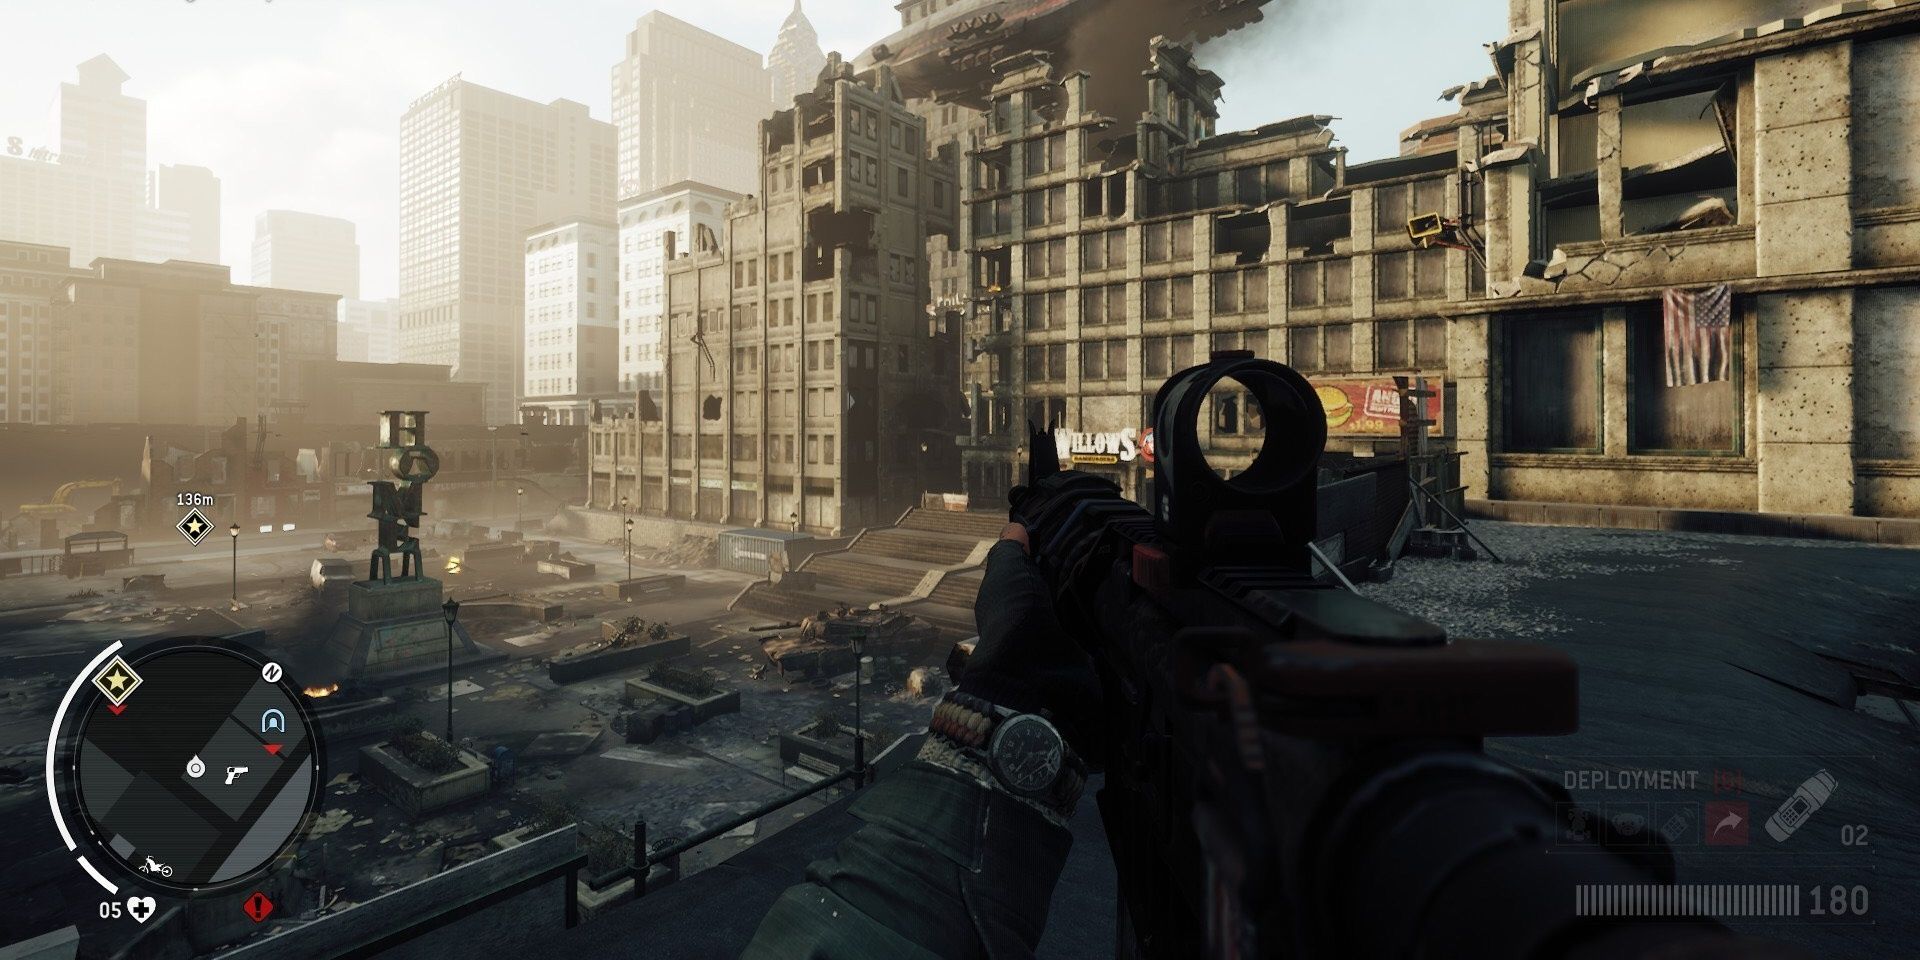 homefront showing a ruined America